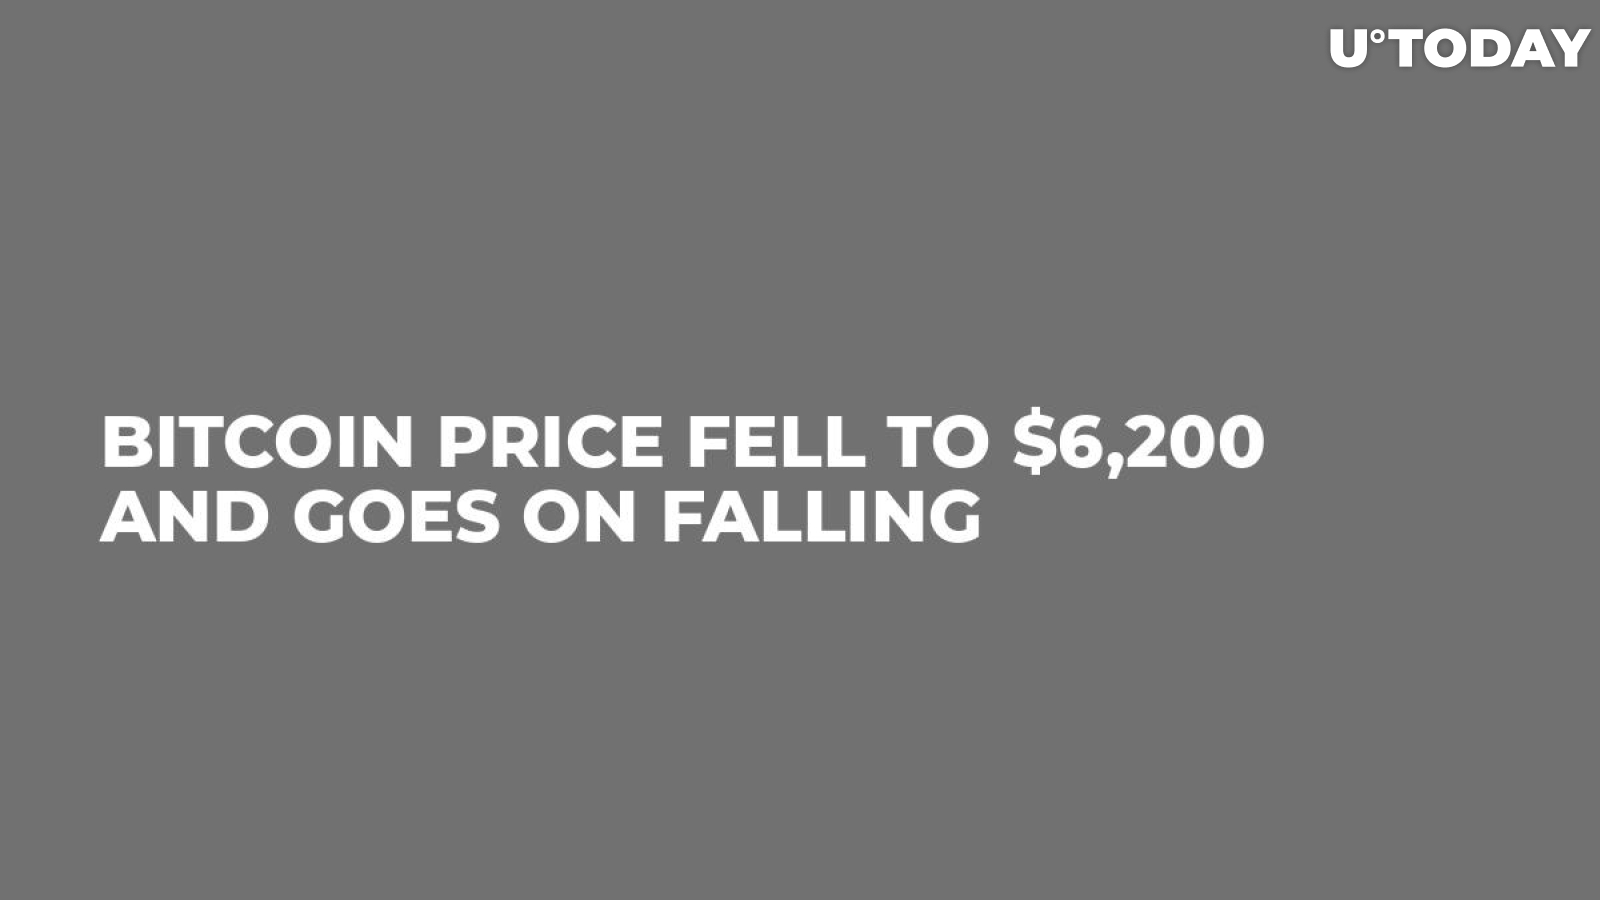 Bitcoin Price Fell to $6,200 and Goes On Falling